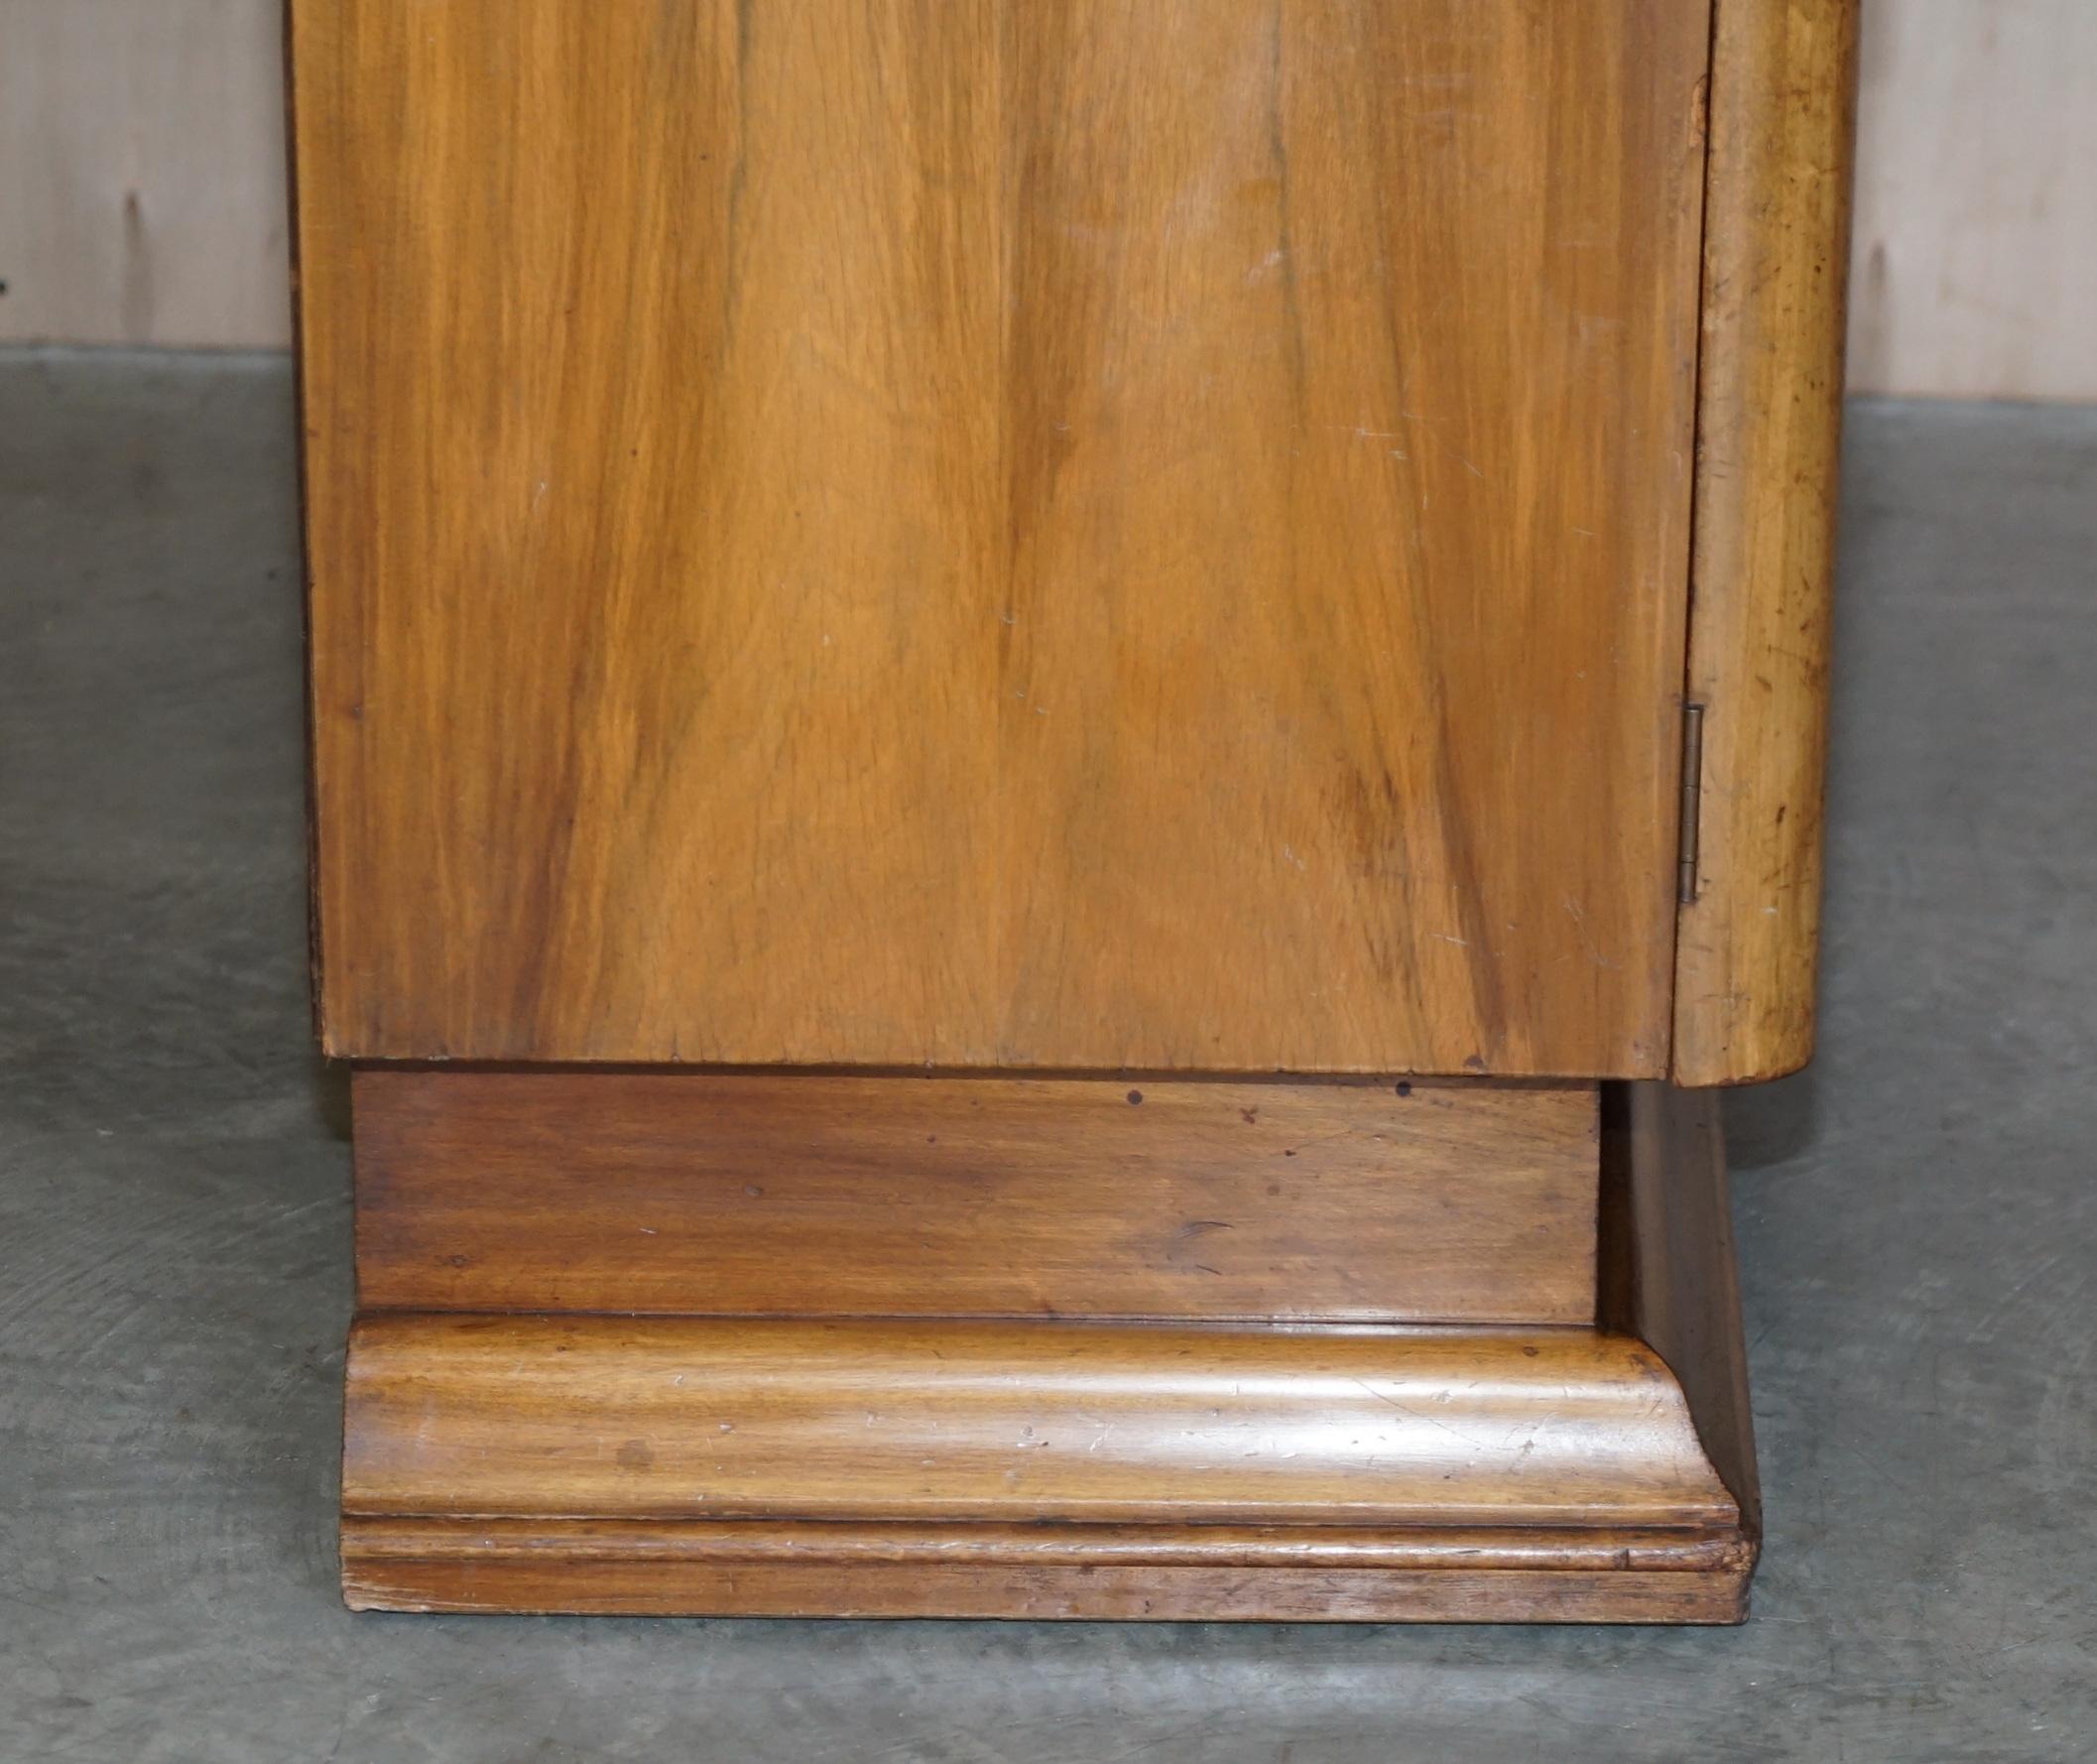 Stunning Antique Art Deco Burr Walnut Sideboard with Drawers Drinks Cabinet For Sale 10